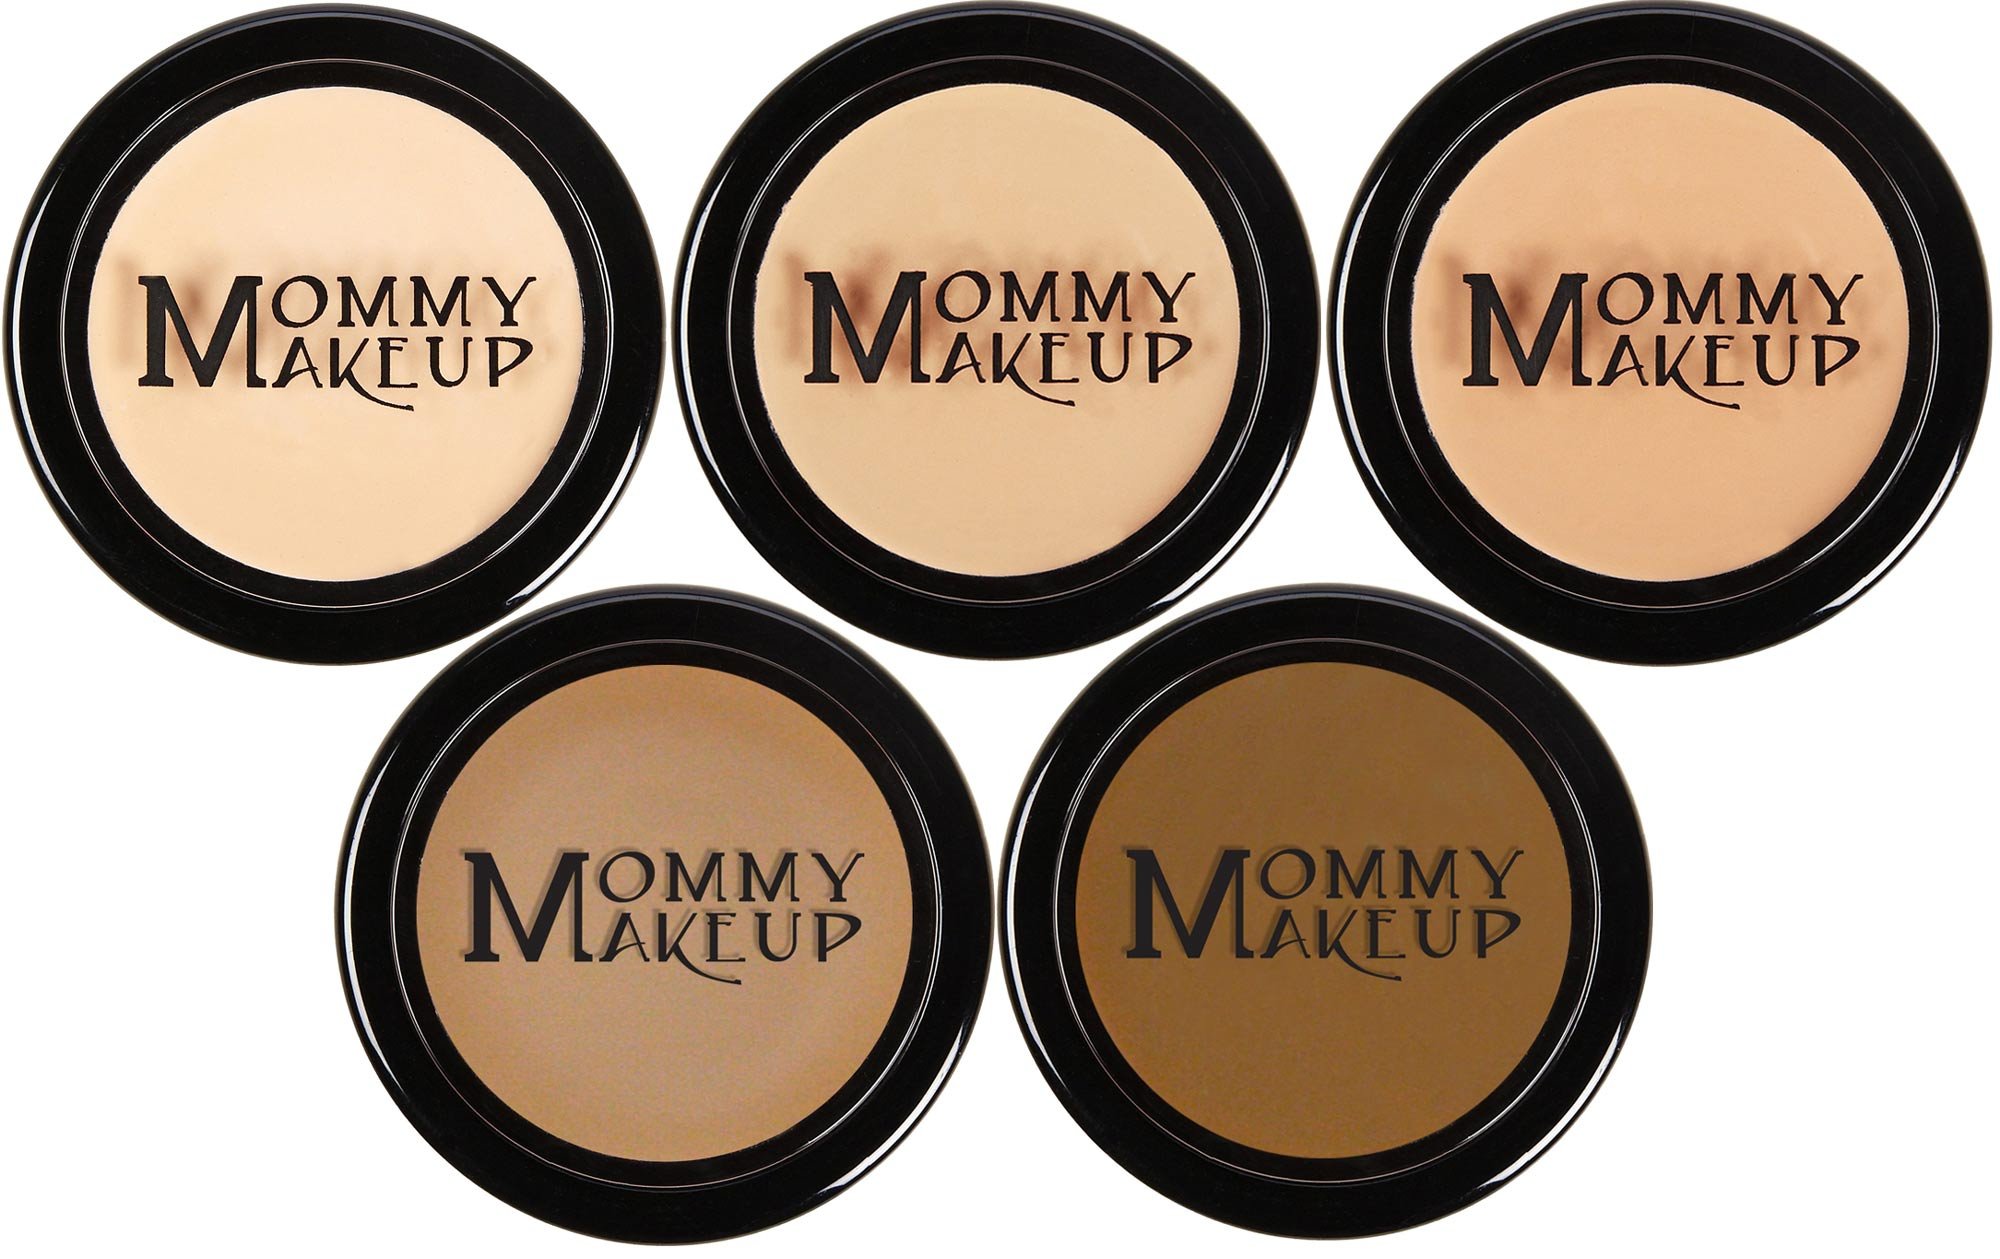 Mommy's Little Helper Concealer - Under Eye Concealer/Face Coverup/Eyeshadow Base. Hide blemishes and imperfections. Oil-free, Talc-free, Paraben-free, PTFE-free. [SLEPT WELL - Medium/Dark]